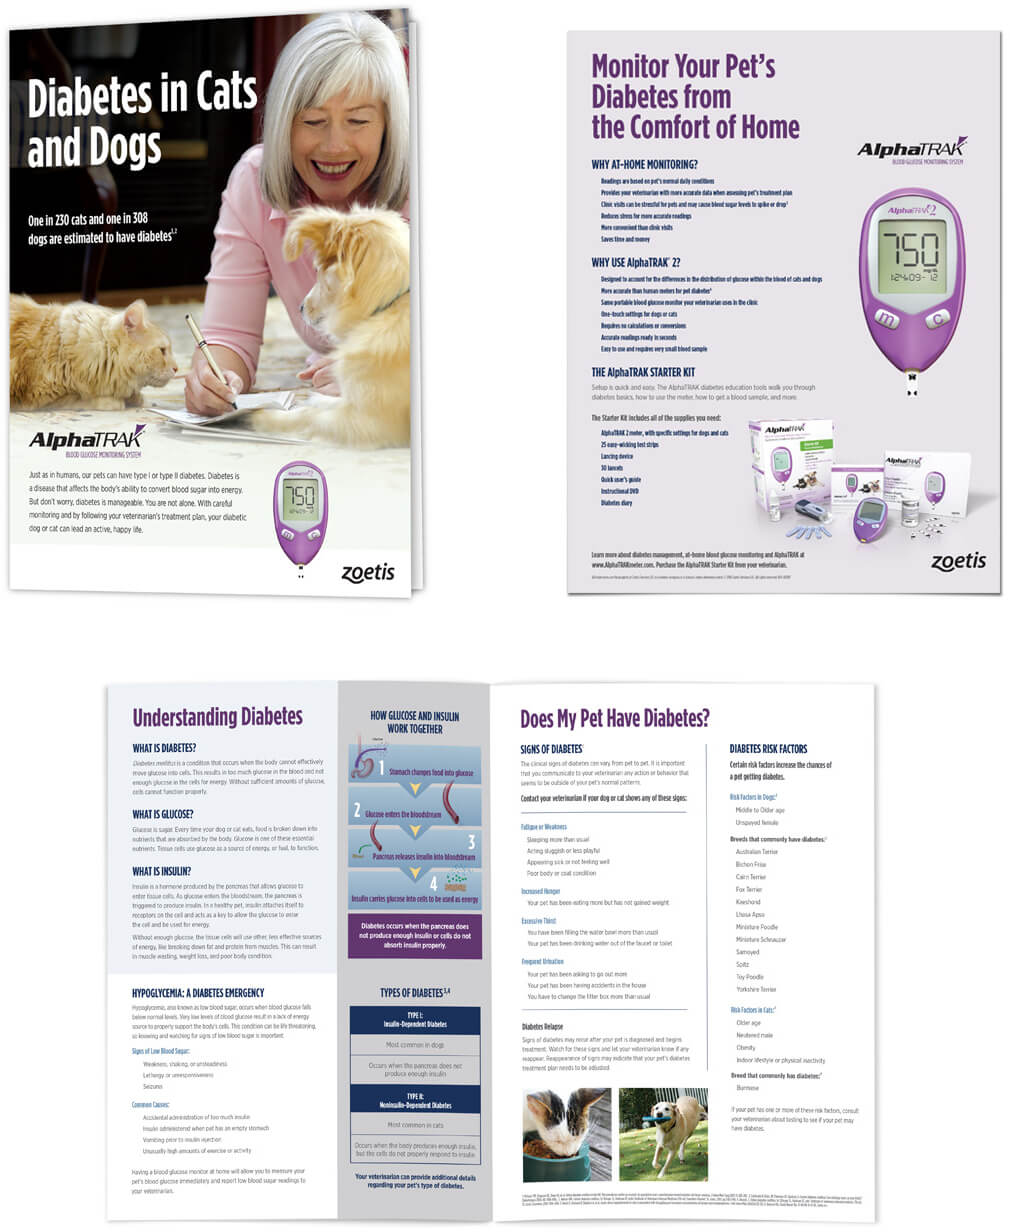 AlphaTRAK, In-clinic support full size brochure on diabetes in cats and dogs as well as monitor your pets diabetes from the comfort of home